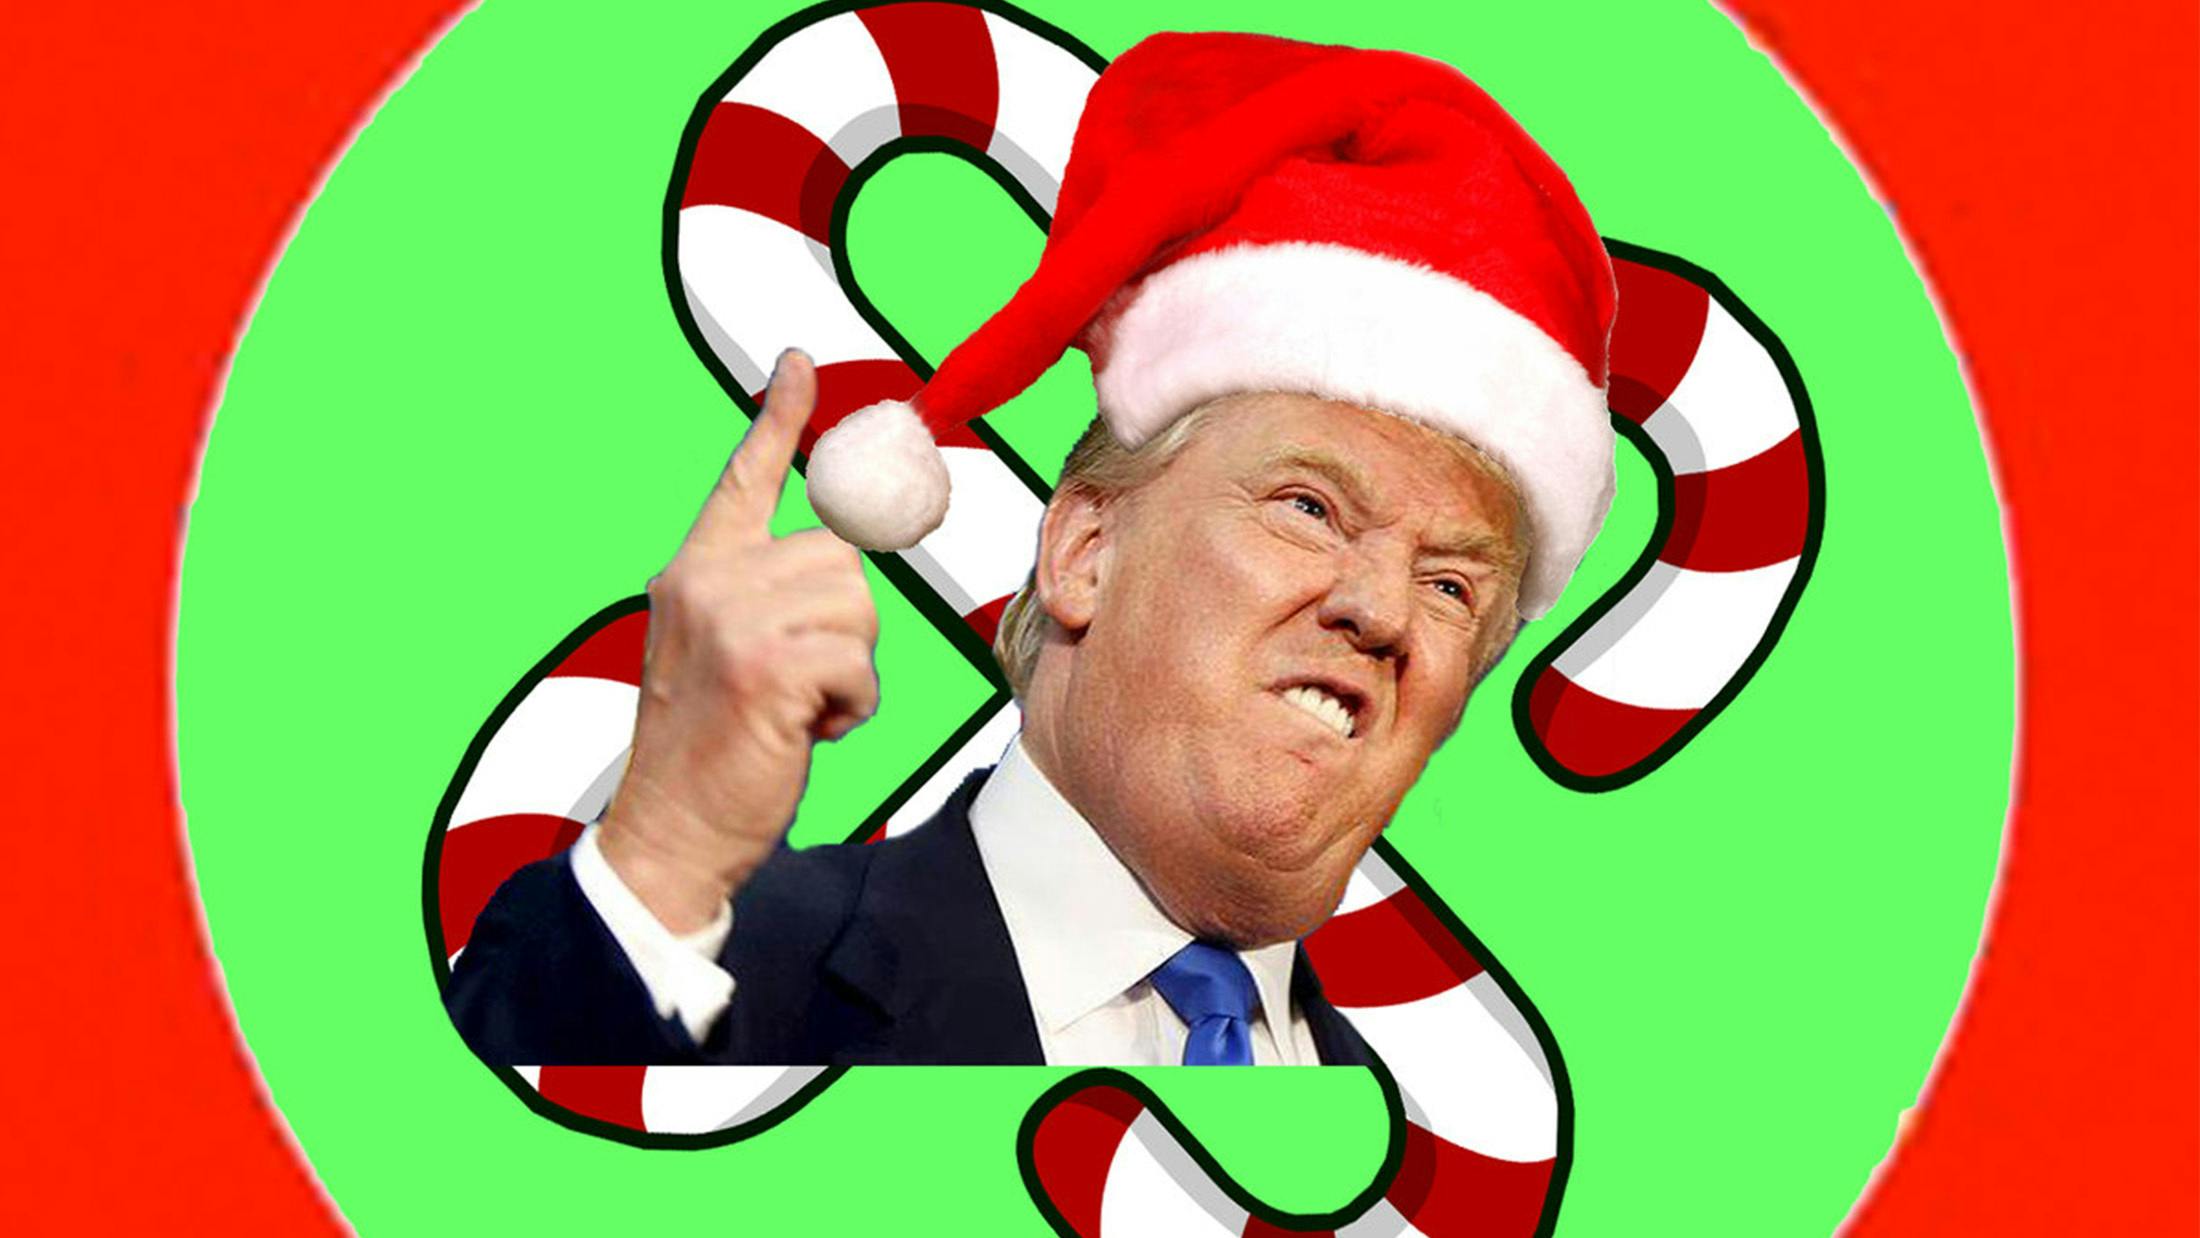 Anal Trump Release Christmas EP That Hates Trump As Much As You Do